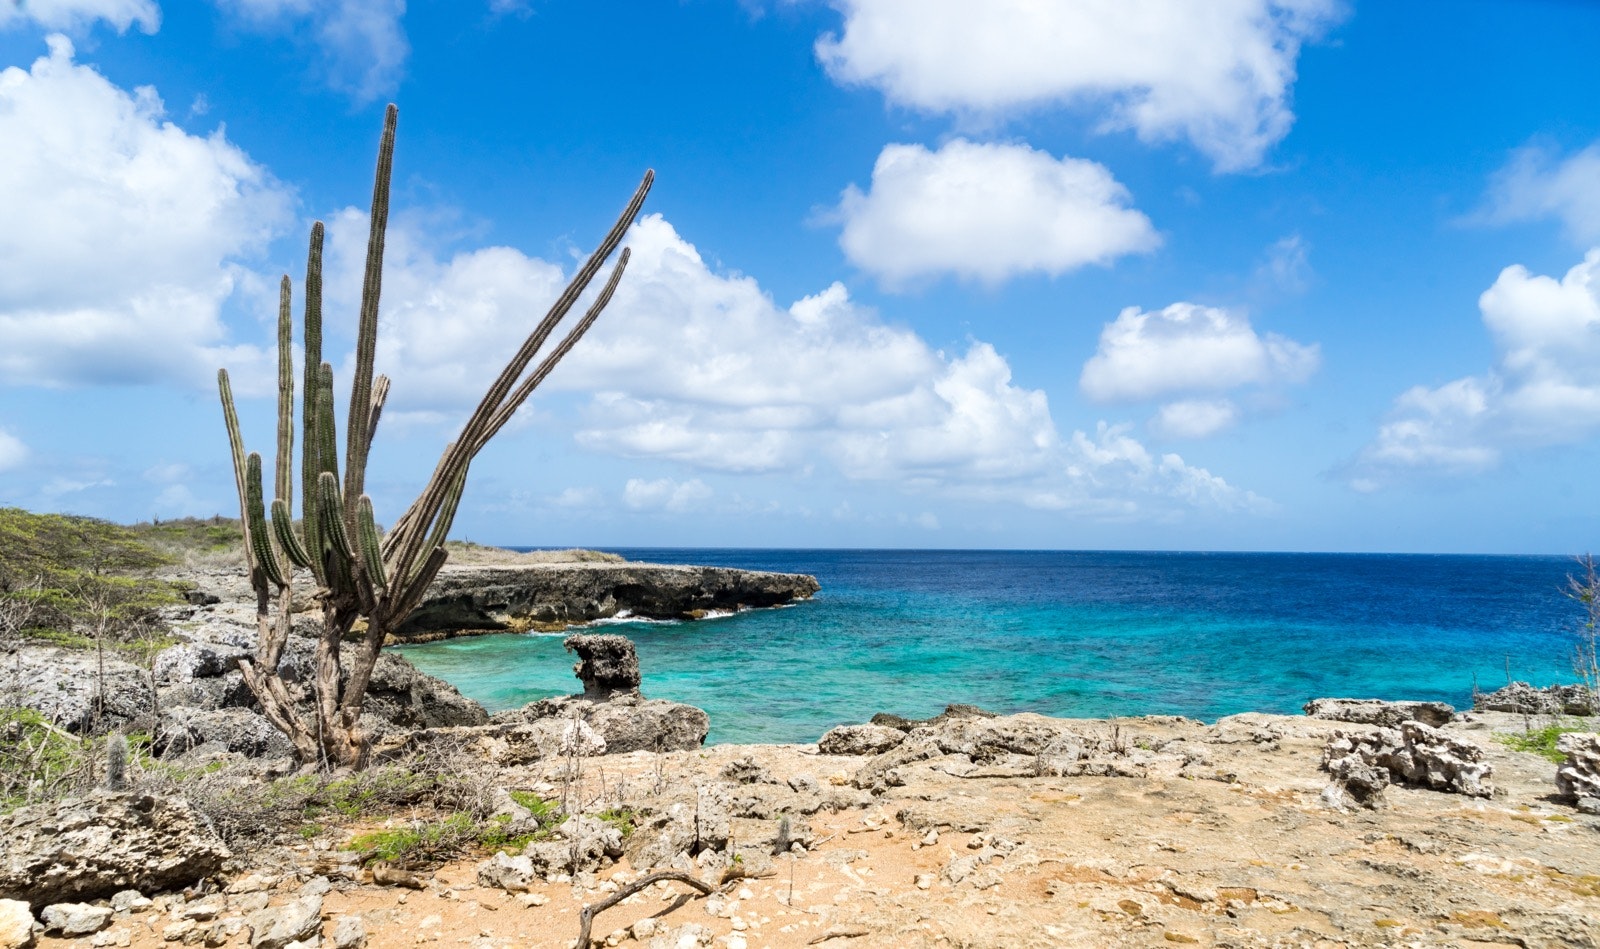 Washington Slagbaai National Park -Views around the Caribbean Island of Bonaire in the ABC Islands; Shutterstock ID 459862570; Your name (First / Last): Alicia Johnson; GL account no.: 65050; Netsuite department name: Online Editorial ; Full Product or Project name including edition: Bonaire